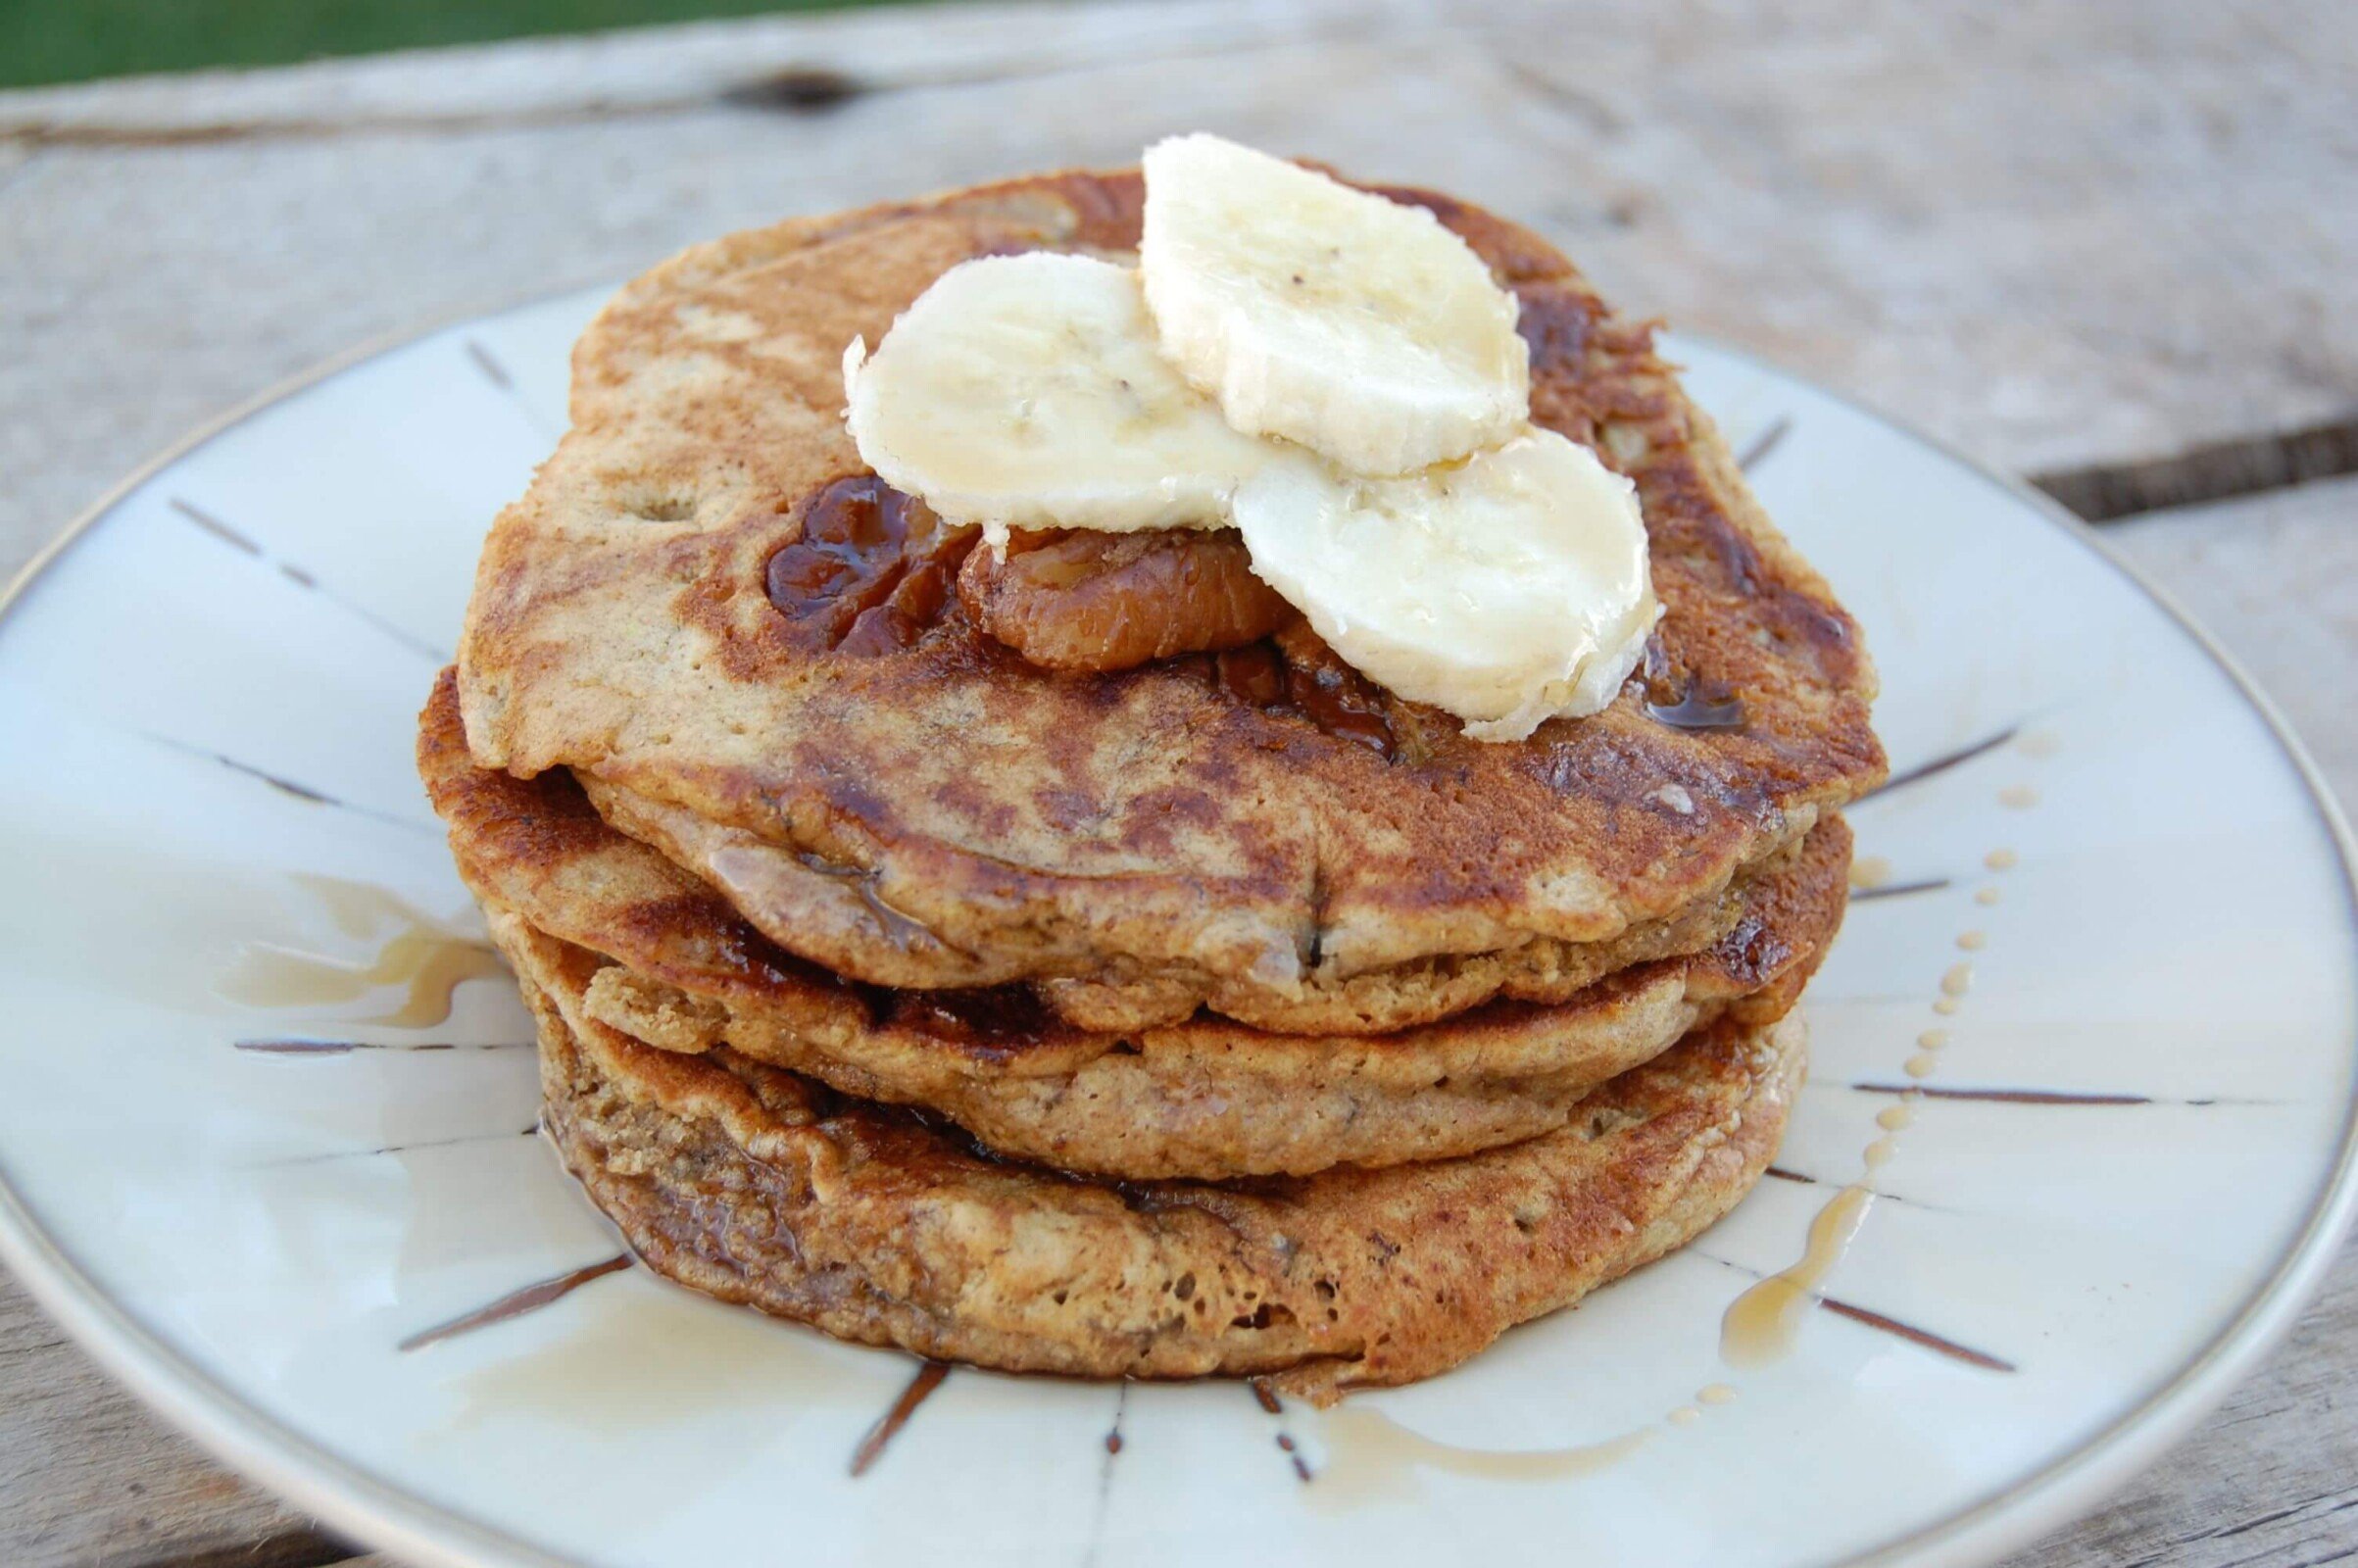 Whole-Wheat Banana Pancakes from 100 Days of Real Food